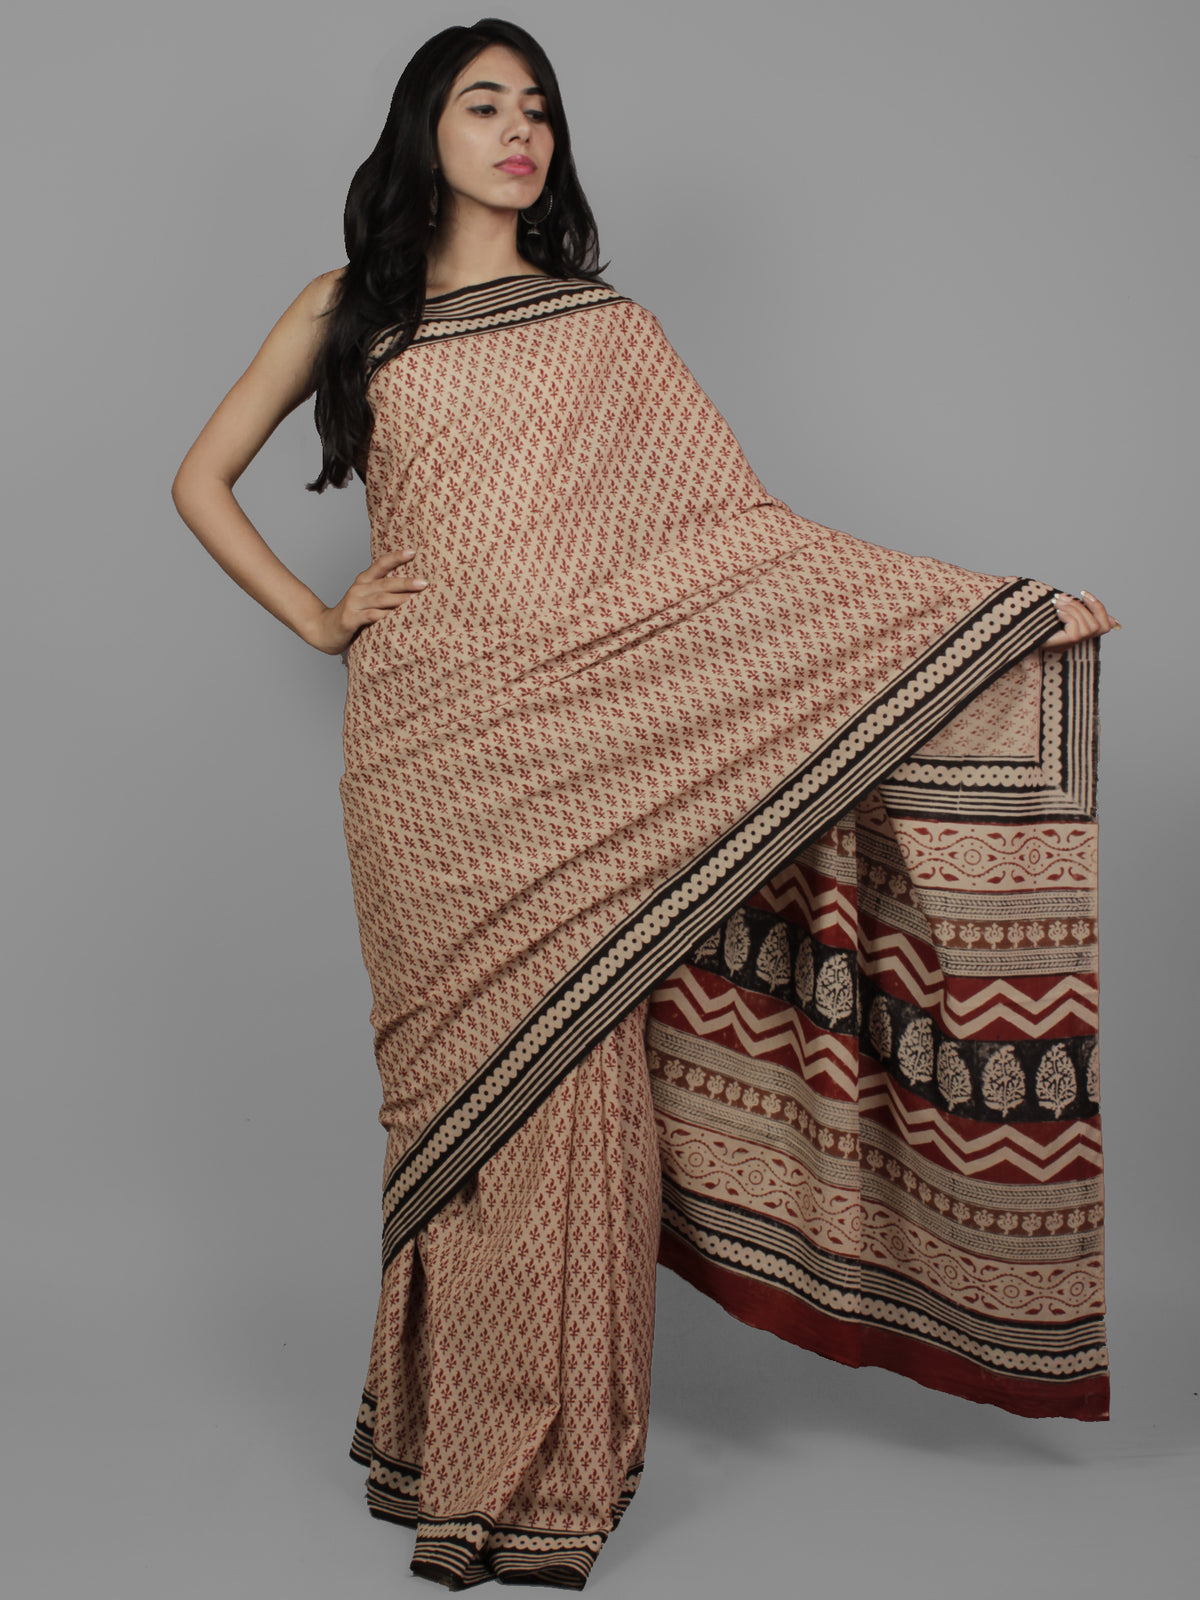 Beige Maroon Black Cotton Hand Block Printed Saree in Natural Colors - S031702220